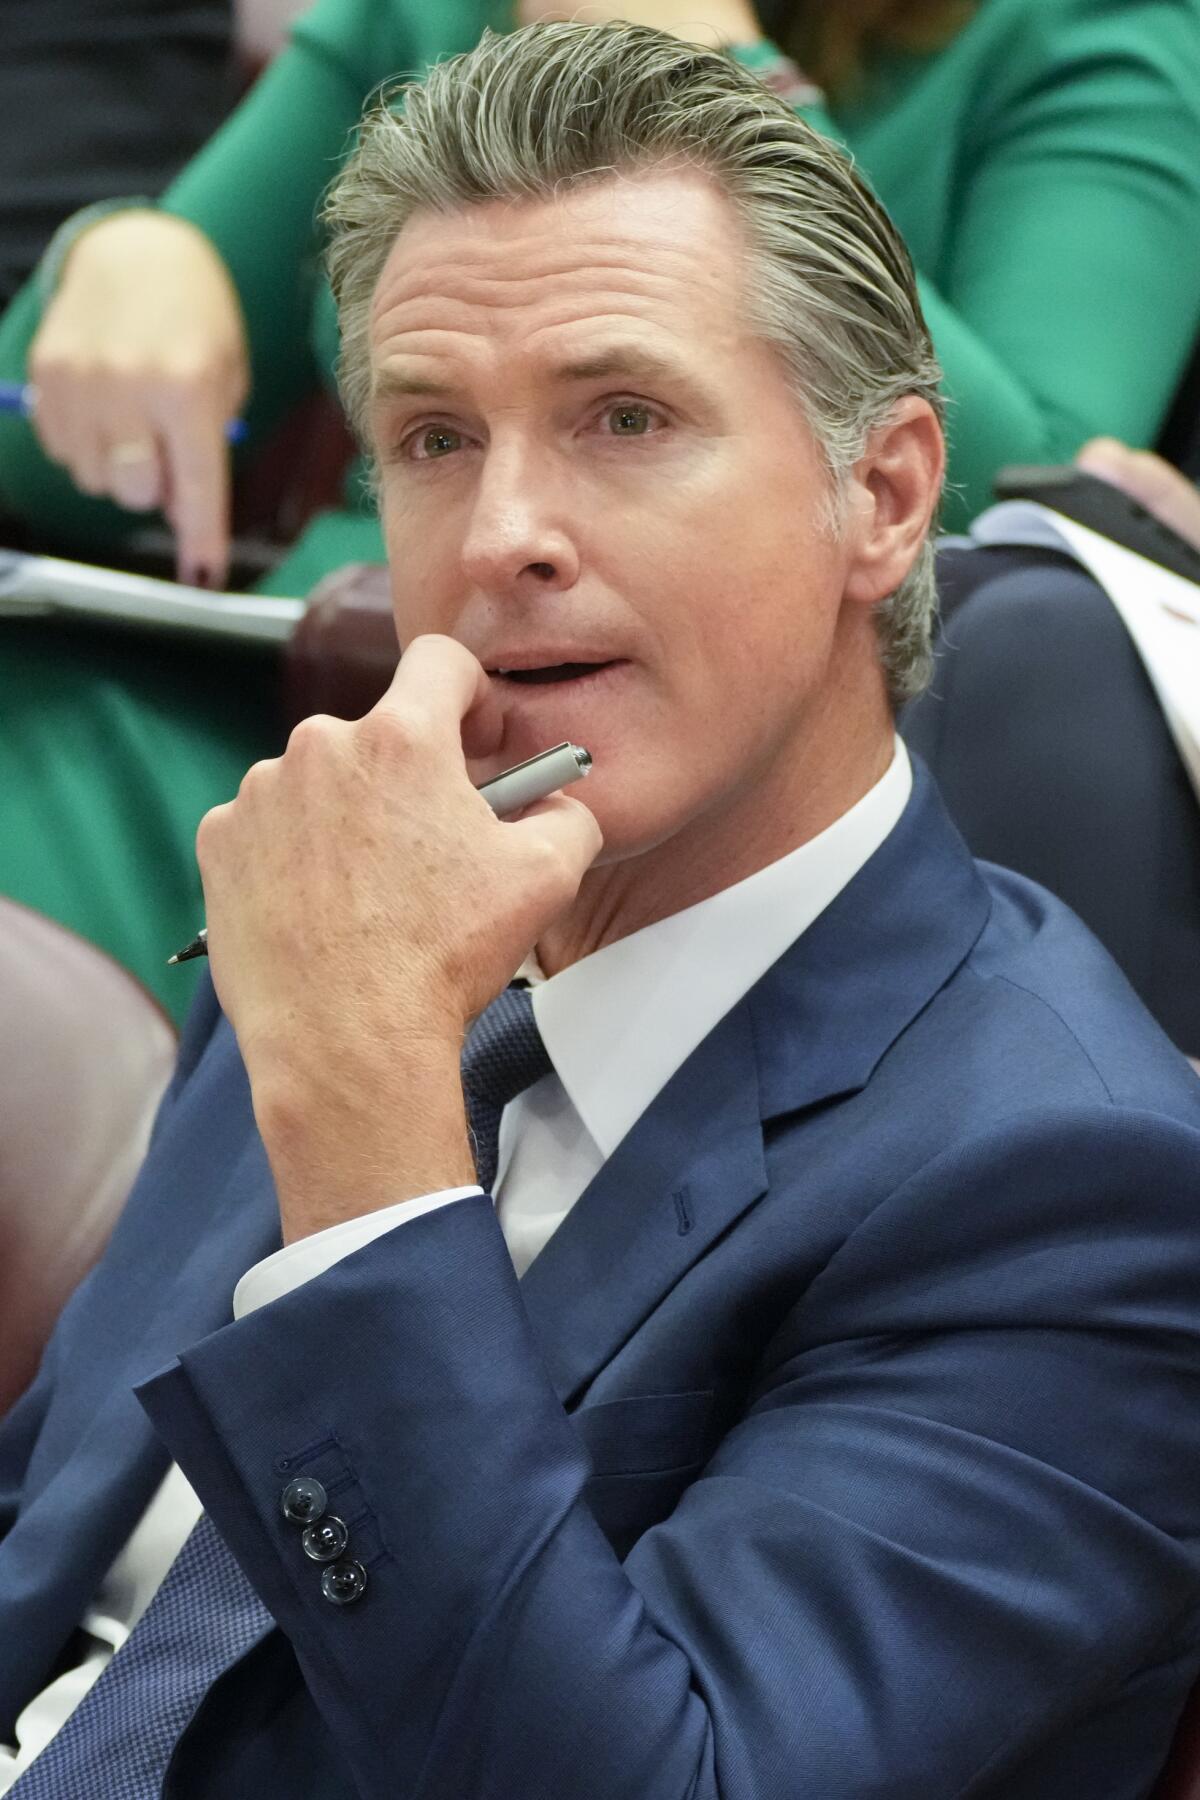 A man in a suit sits while resting his chin on his hand.